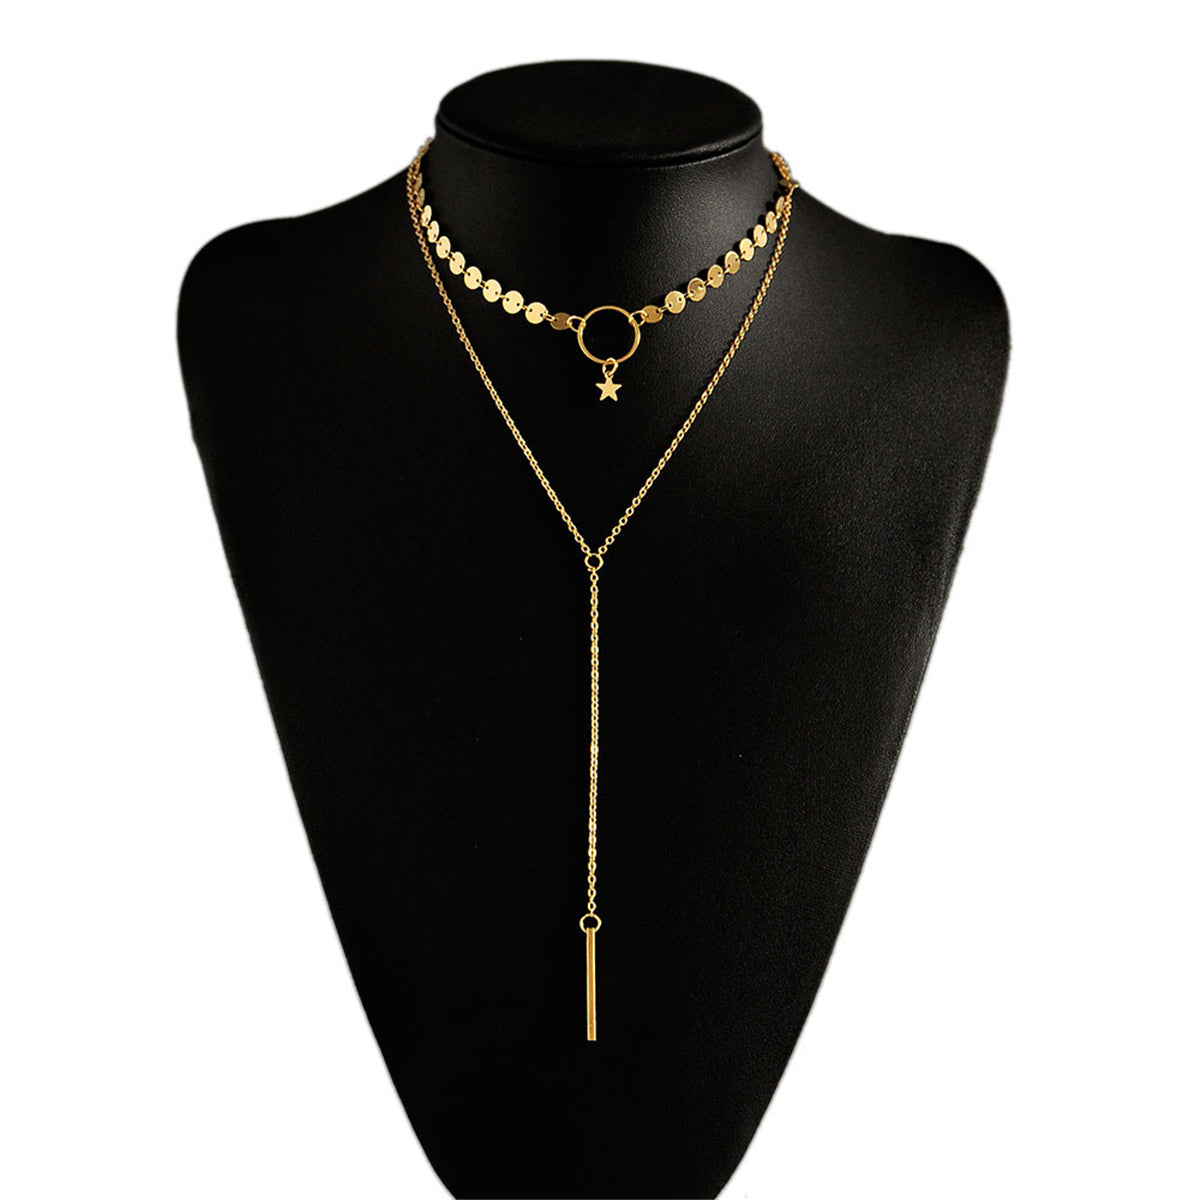 18K Gold-Plated Disc Star Layered Choker Necklace